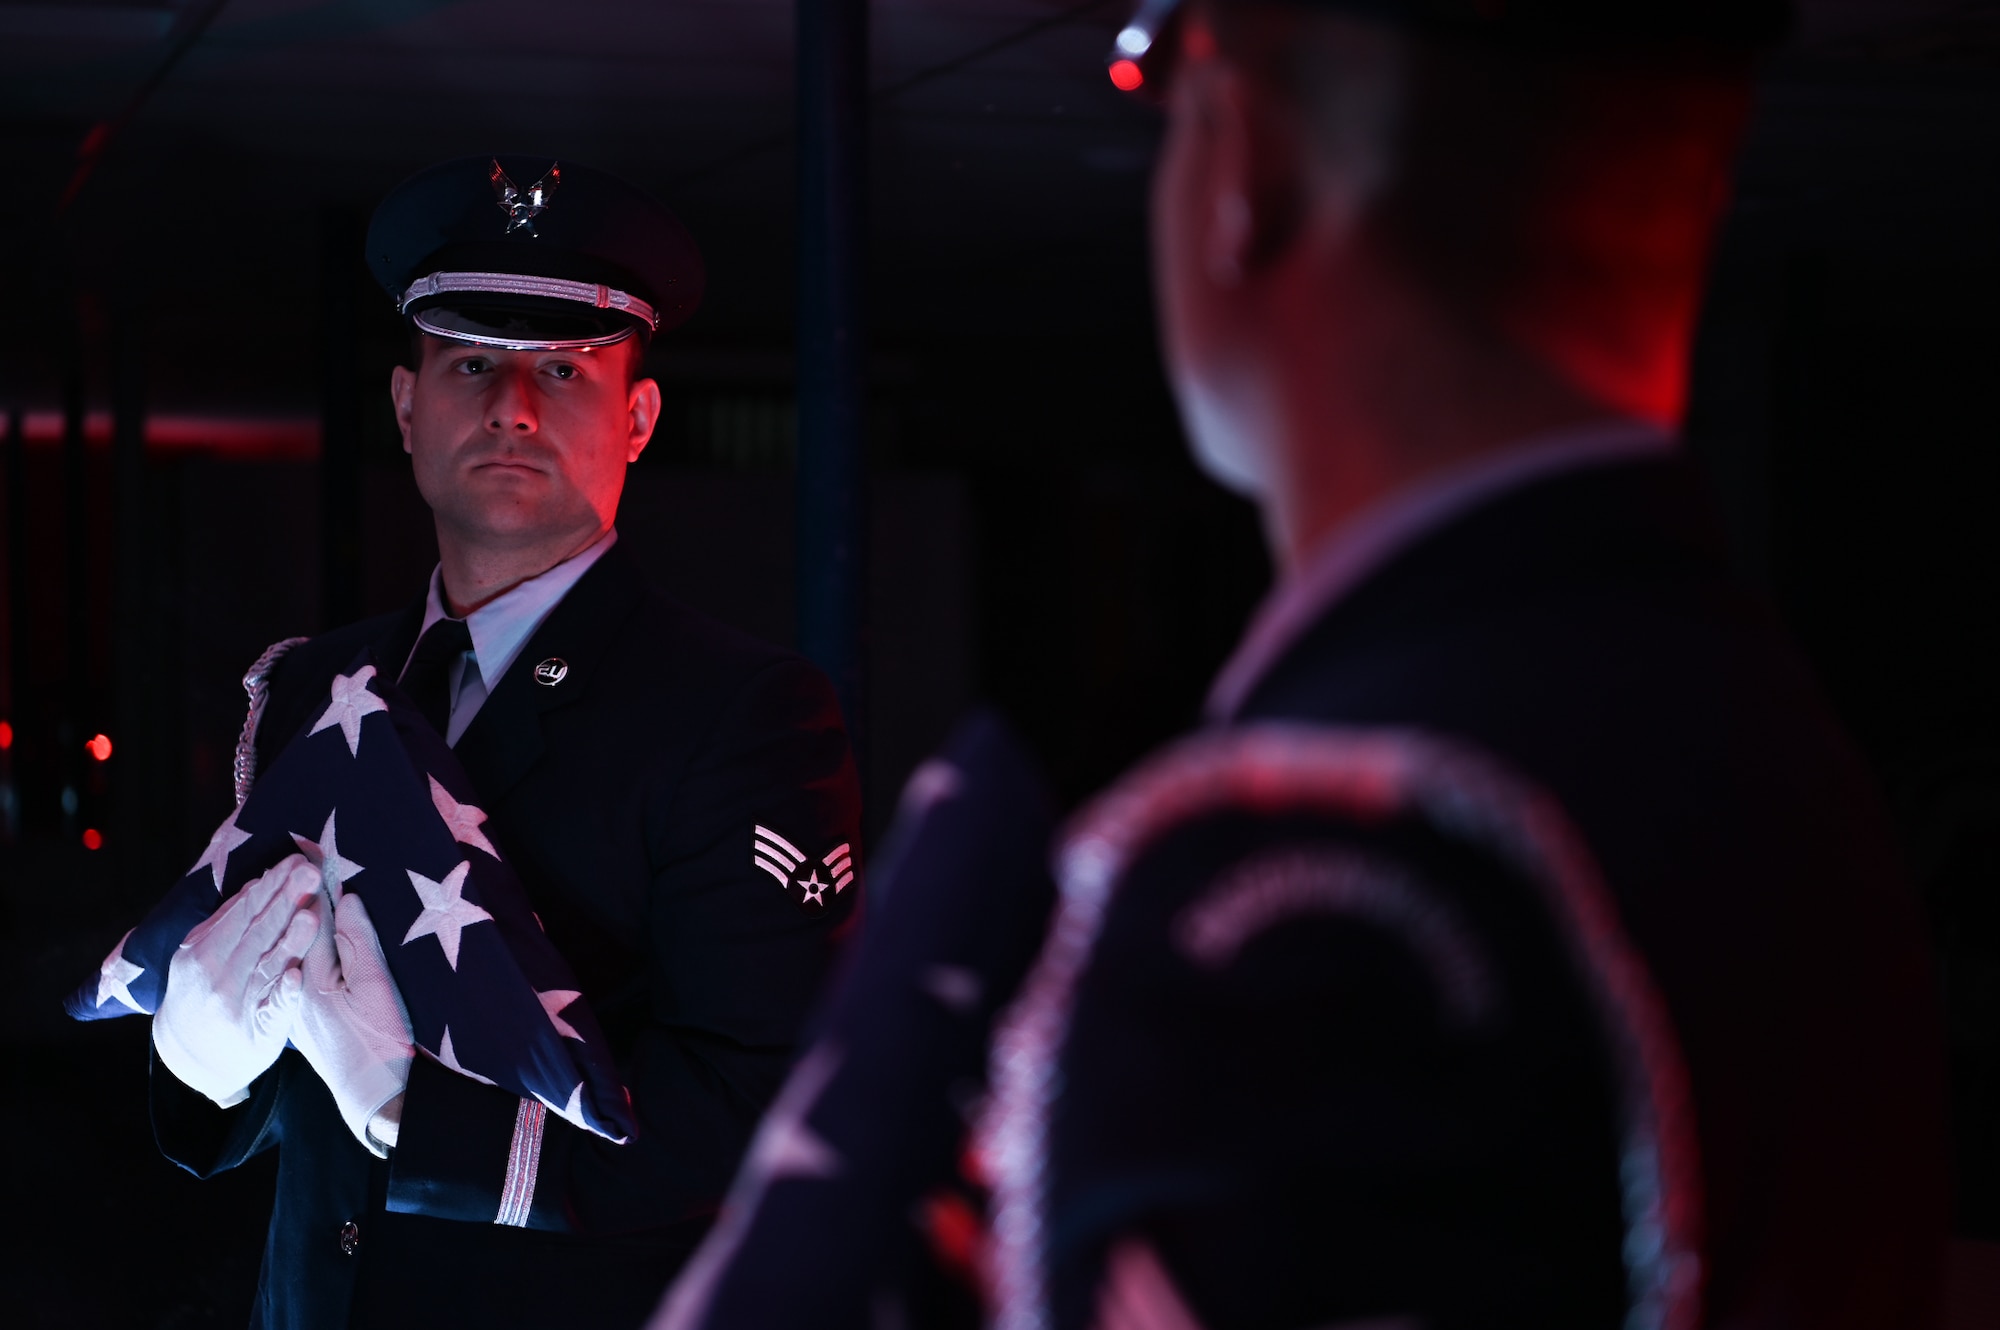 Senior Airman Dylan Gonsalves, Patriot Honor Guard ceremonial guardsman, stands for a portrait in his ceremonial dress uniform at Hanscom Air Force Base, Mass., Dec. 10. The Patriot Honor Guard participated in more than 2,300 funeral honors for active duty, retirees and veterans in New England and Northeastern New York in 2019. (U.S. Air Force photo by Mark Herlihy)